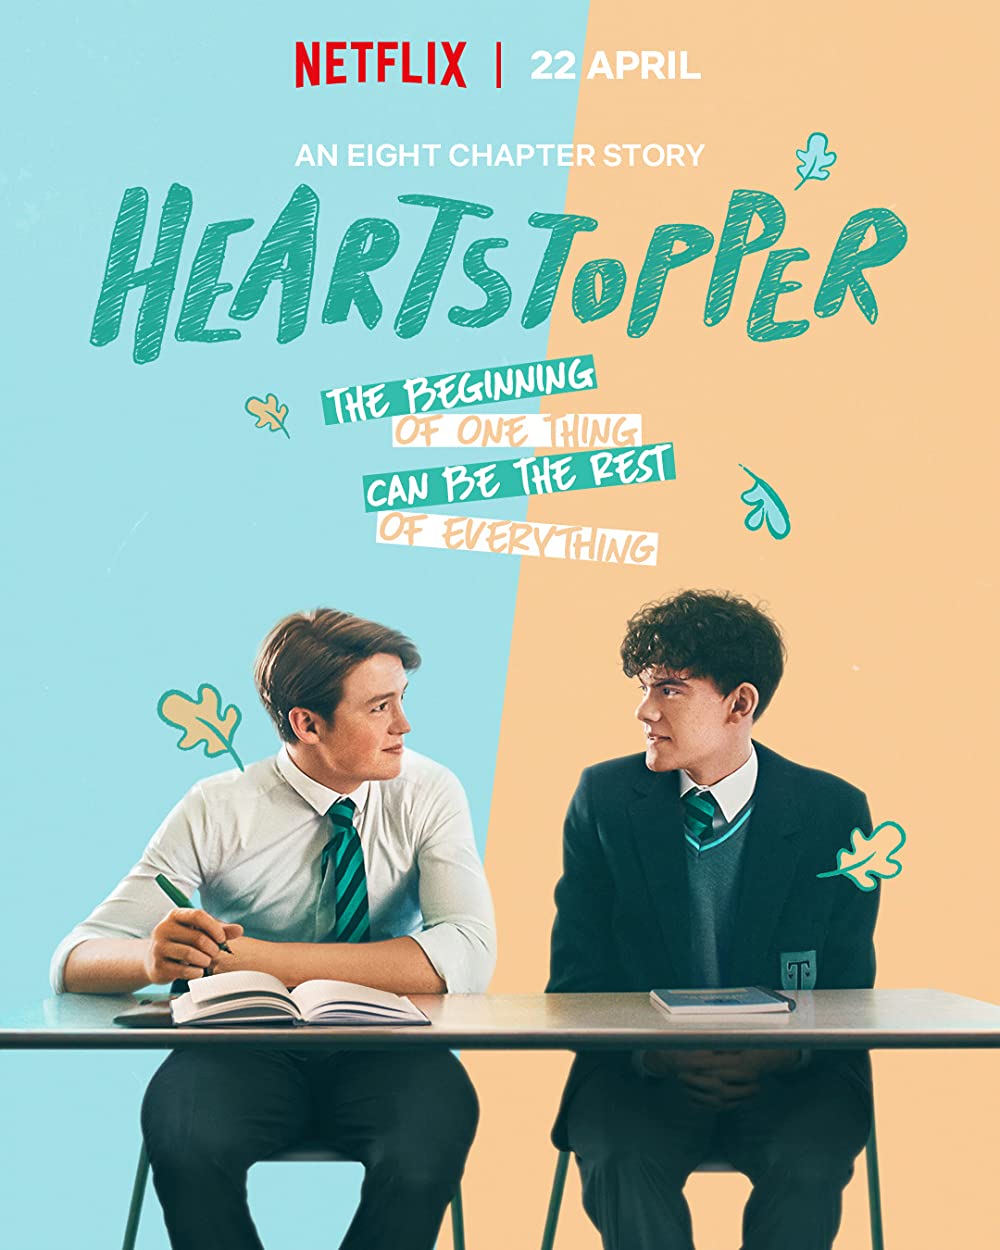 “Heartstopper” Captures The Coming of Age Many LGBTQ+ Youth Wish They Had